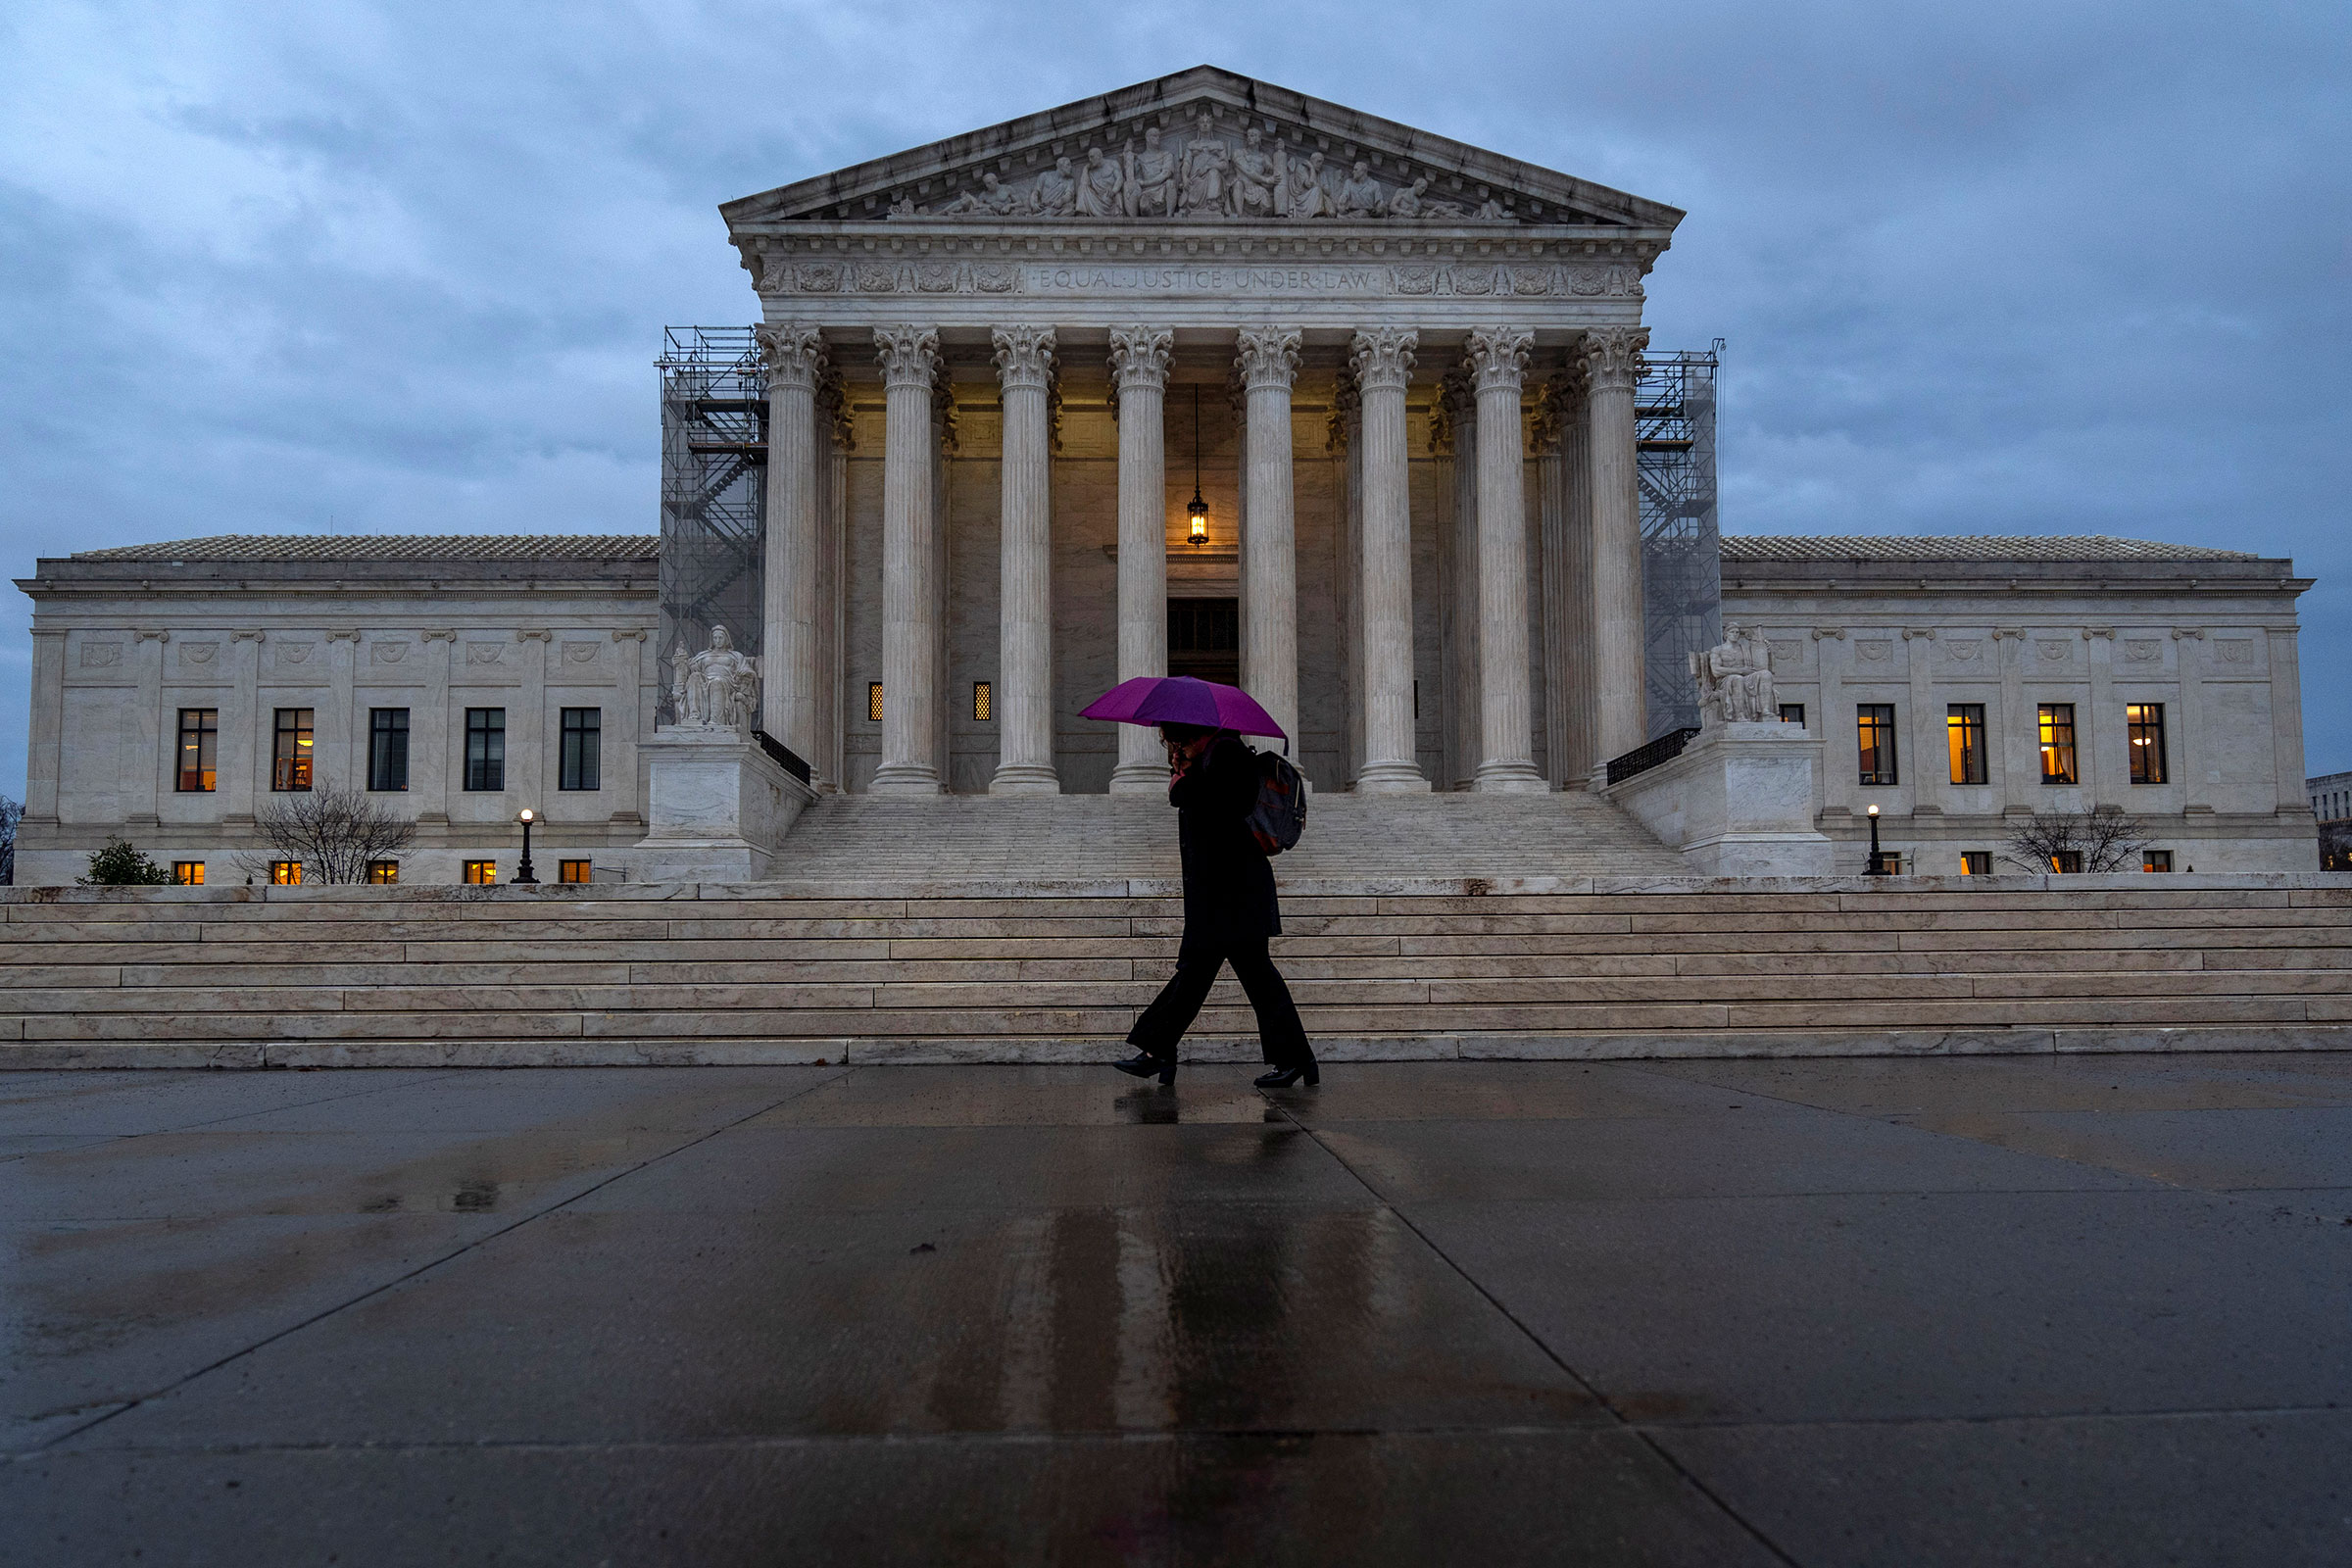 A woman under a purple umbrella walks past the Supreme Court on Wednesday, February 28, in Washington, DC.